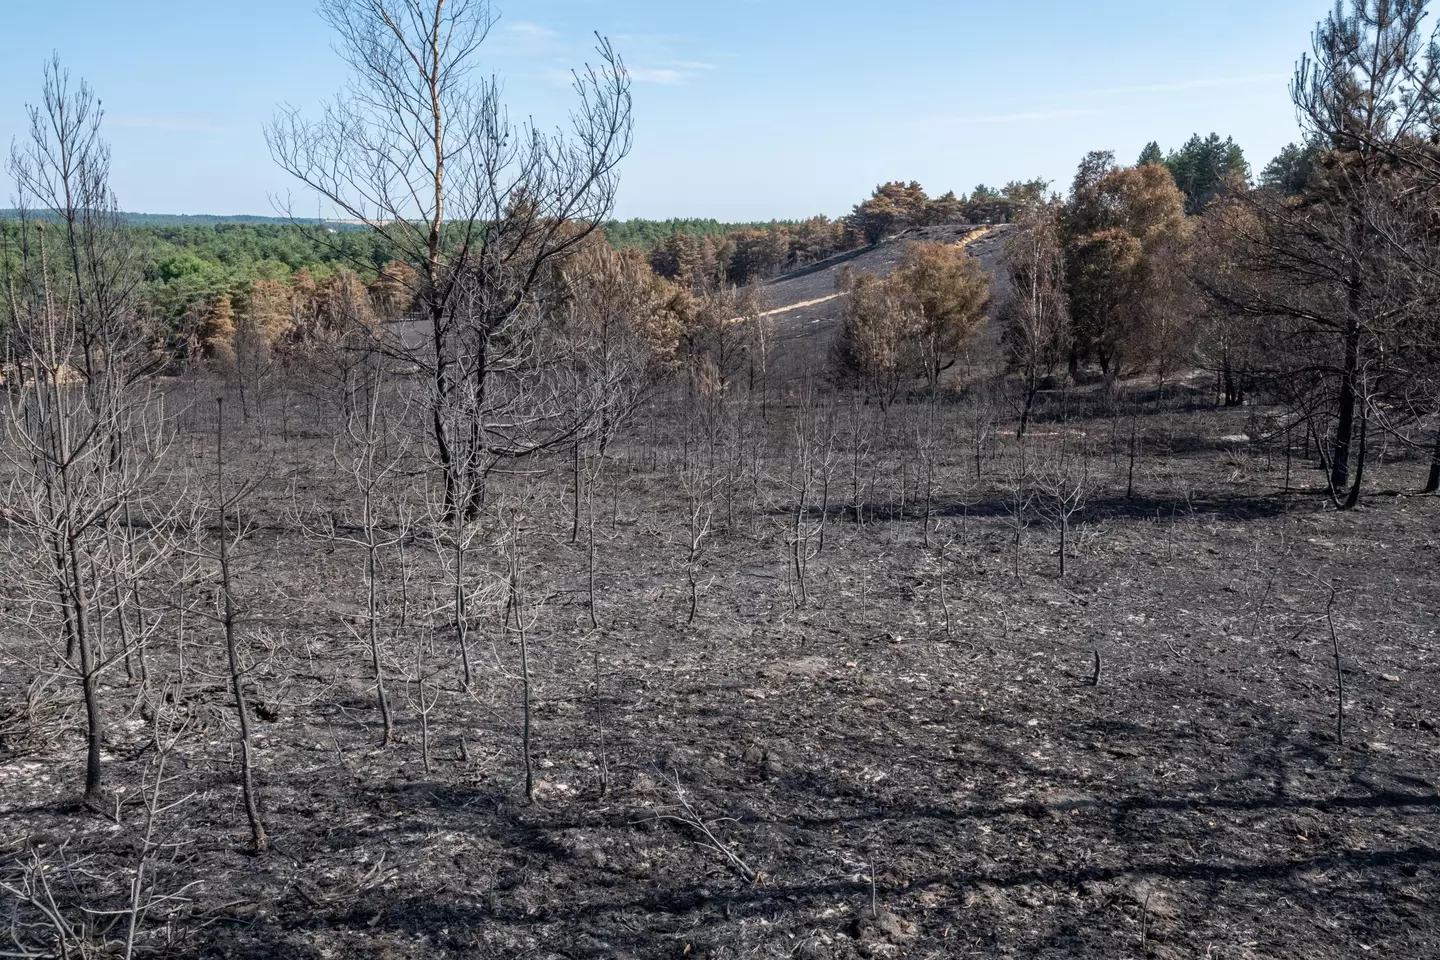 The aftermath of a wildfire in Surrey during last month's heatwave.